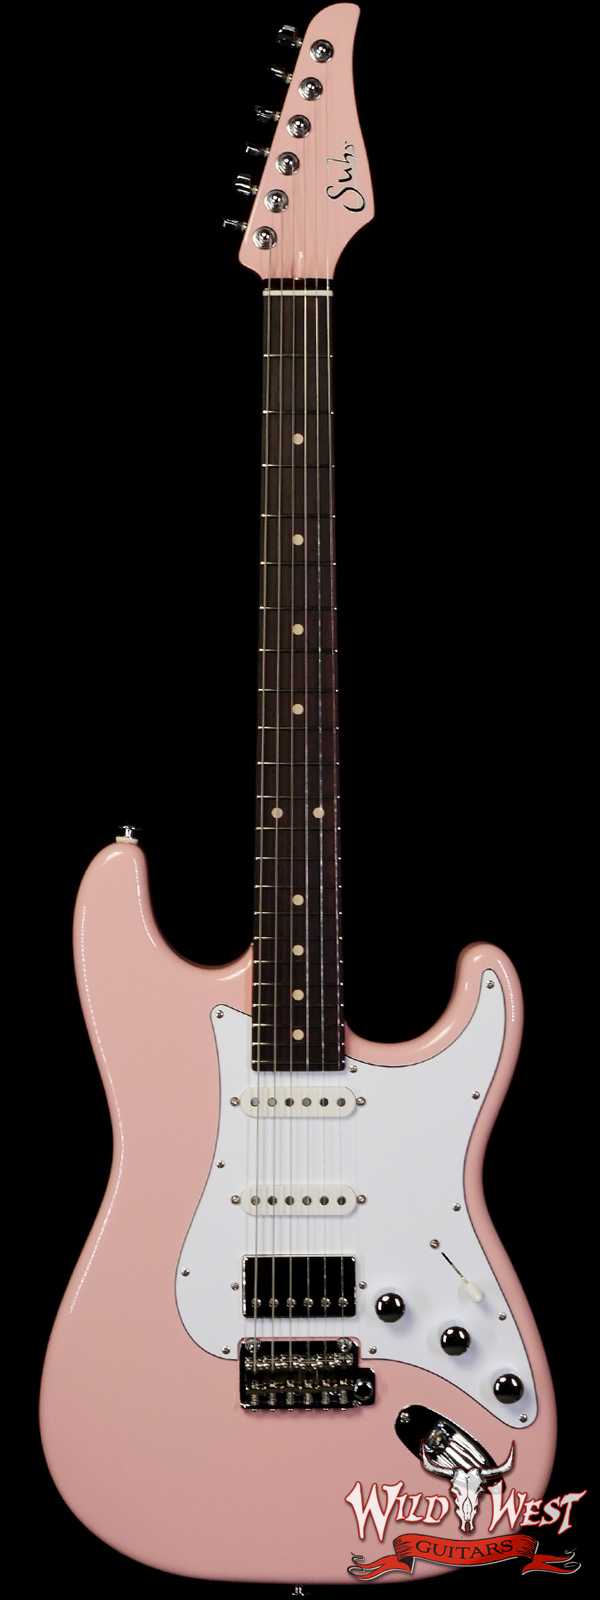 Suhr Custom Classic S HSS Rosewood Fingerboard Matching Color Headstock Shell Pink